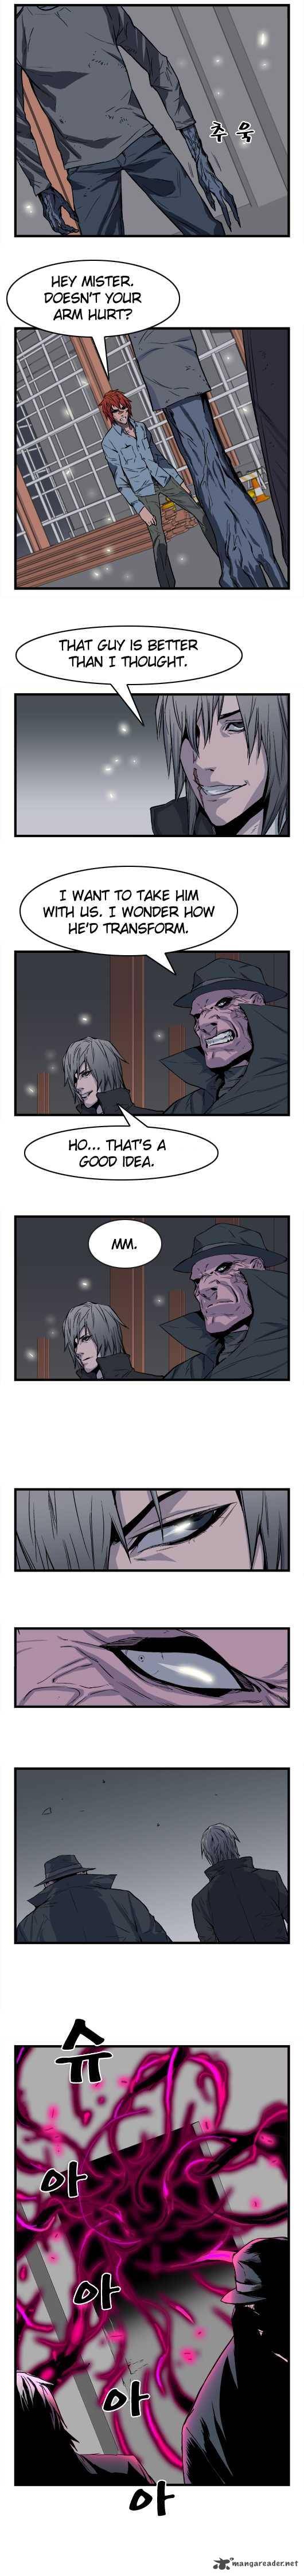 Noblesse 31 3